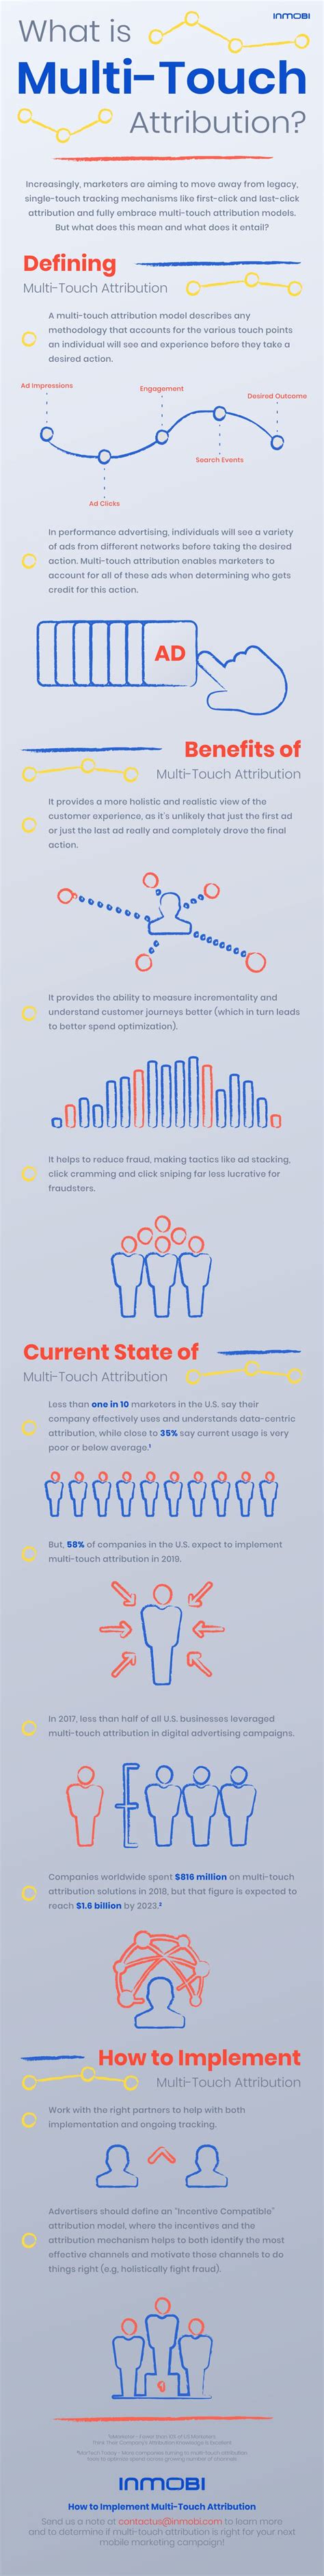 multi touch attribution explained infographic